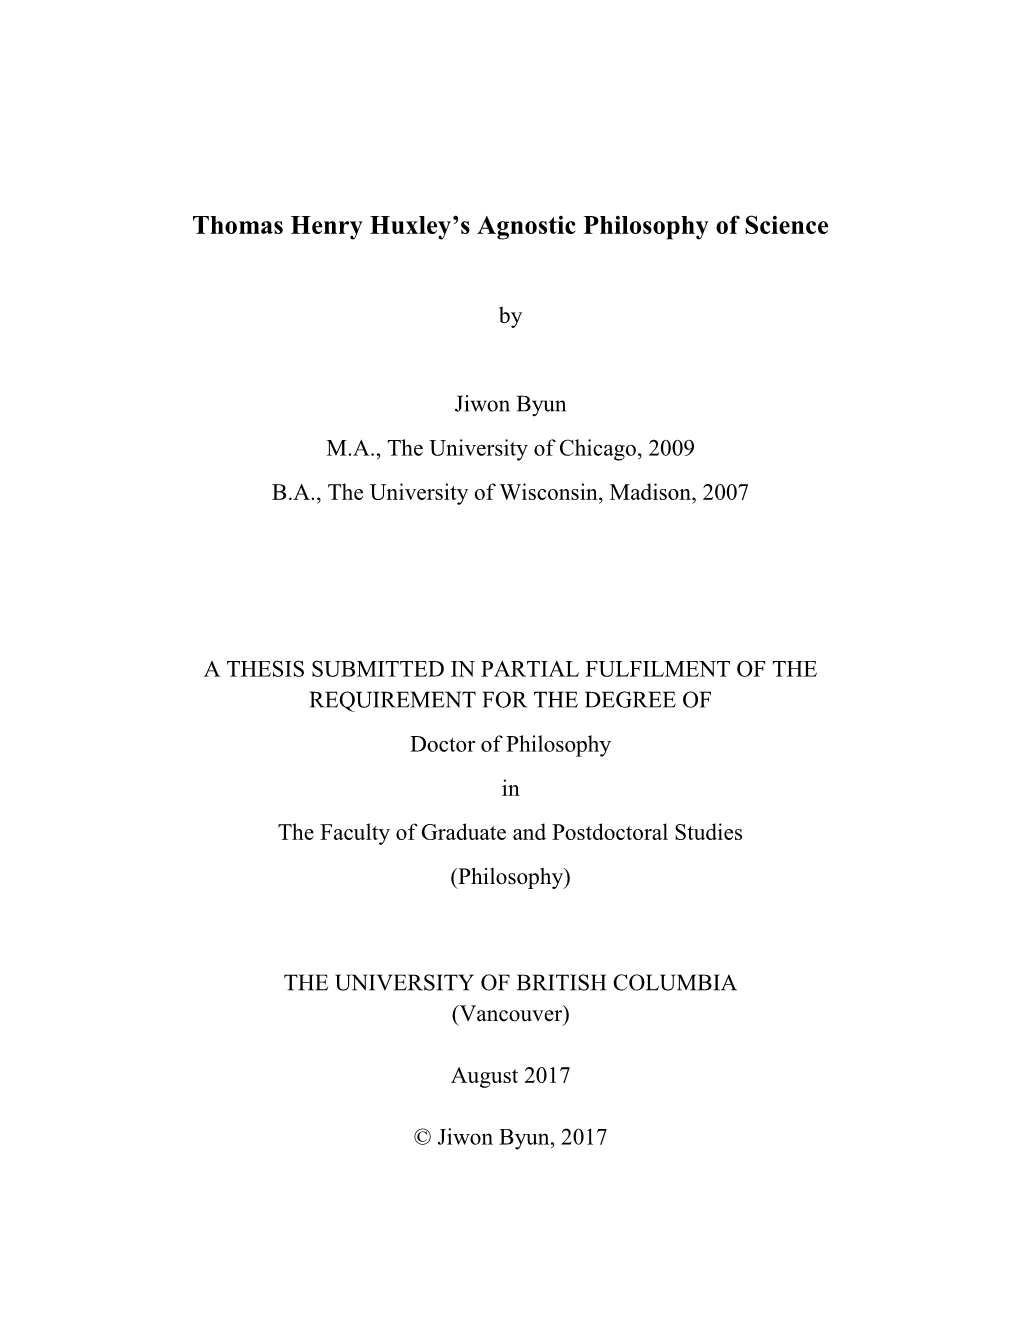 Thomas Henry Huxley's Agnostic Philosophy of Science